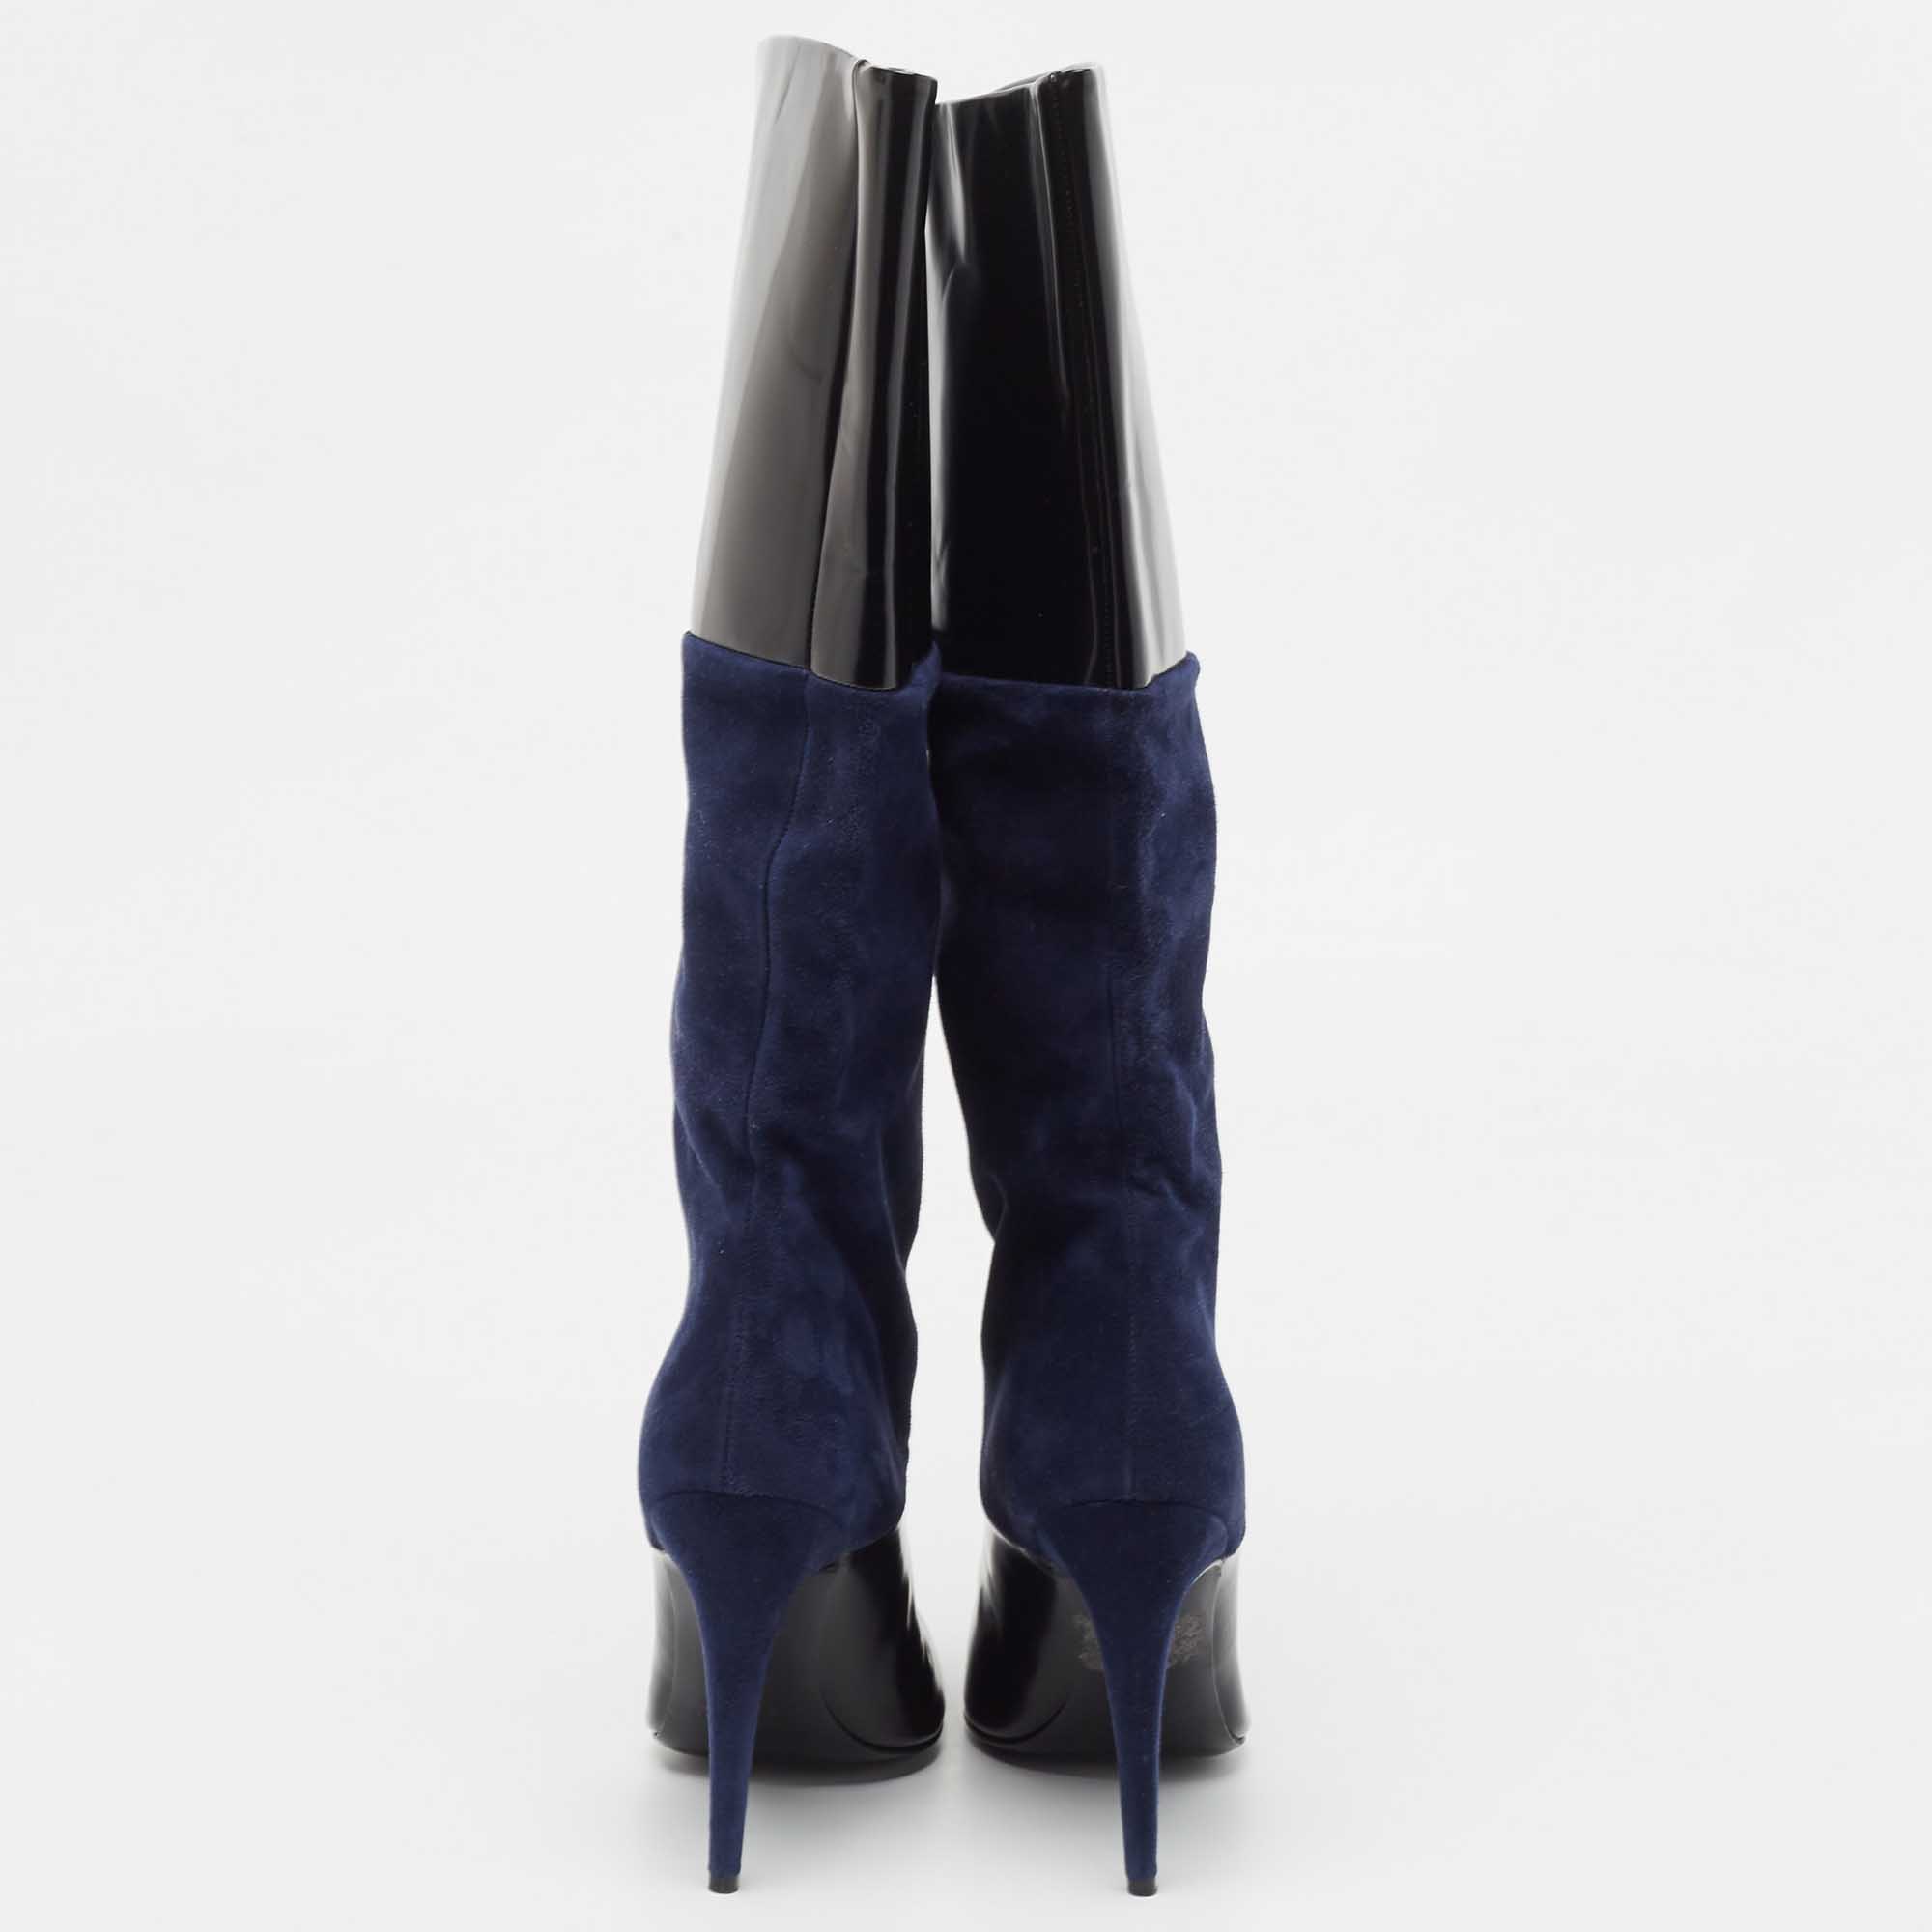 Pierre Hardy  Navy Blue/Black Suede And Patent Knee Length Boots Size 40